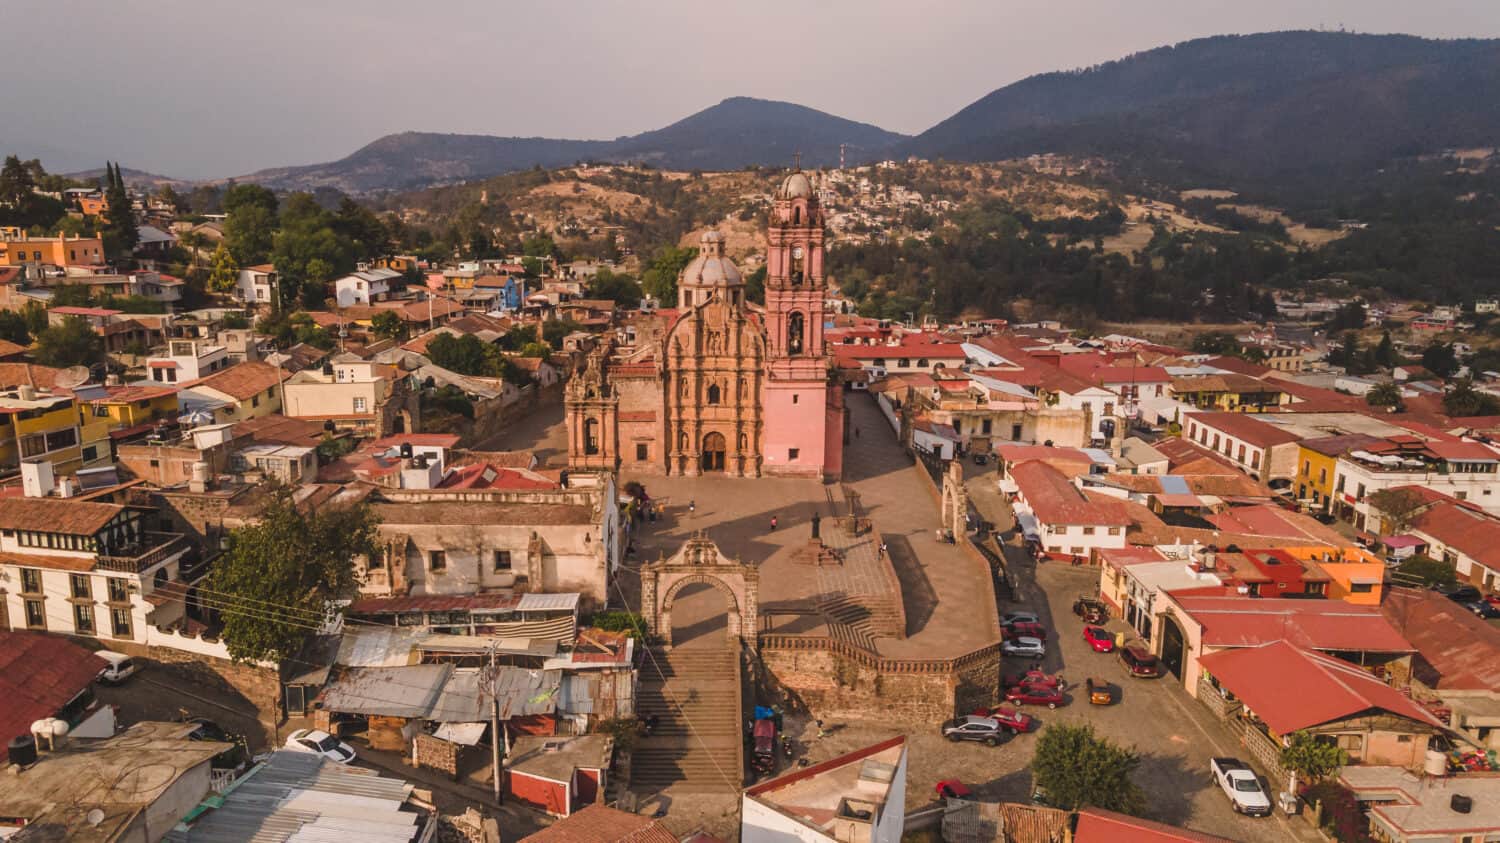 Aerial photos of the historic center of Tlalpujahua, Michoacan, Mexico, as well as its main church